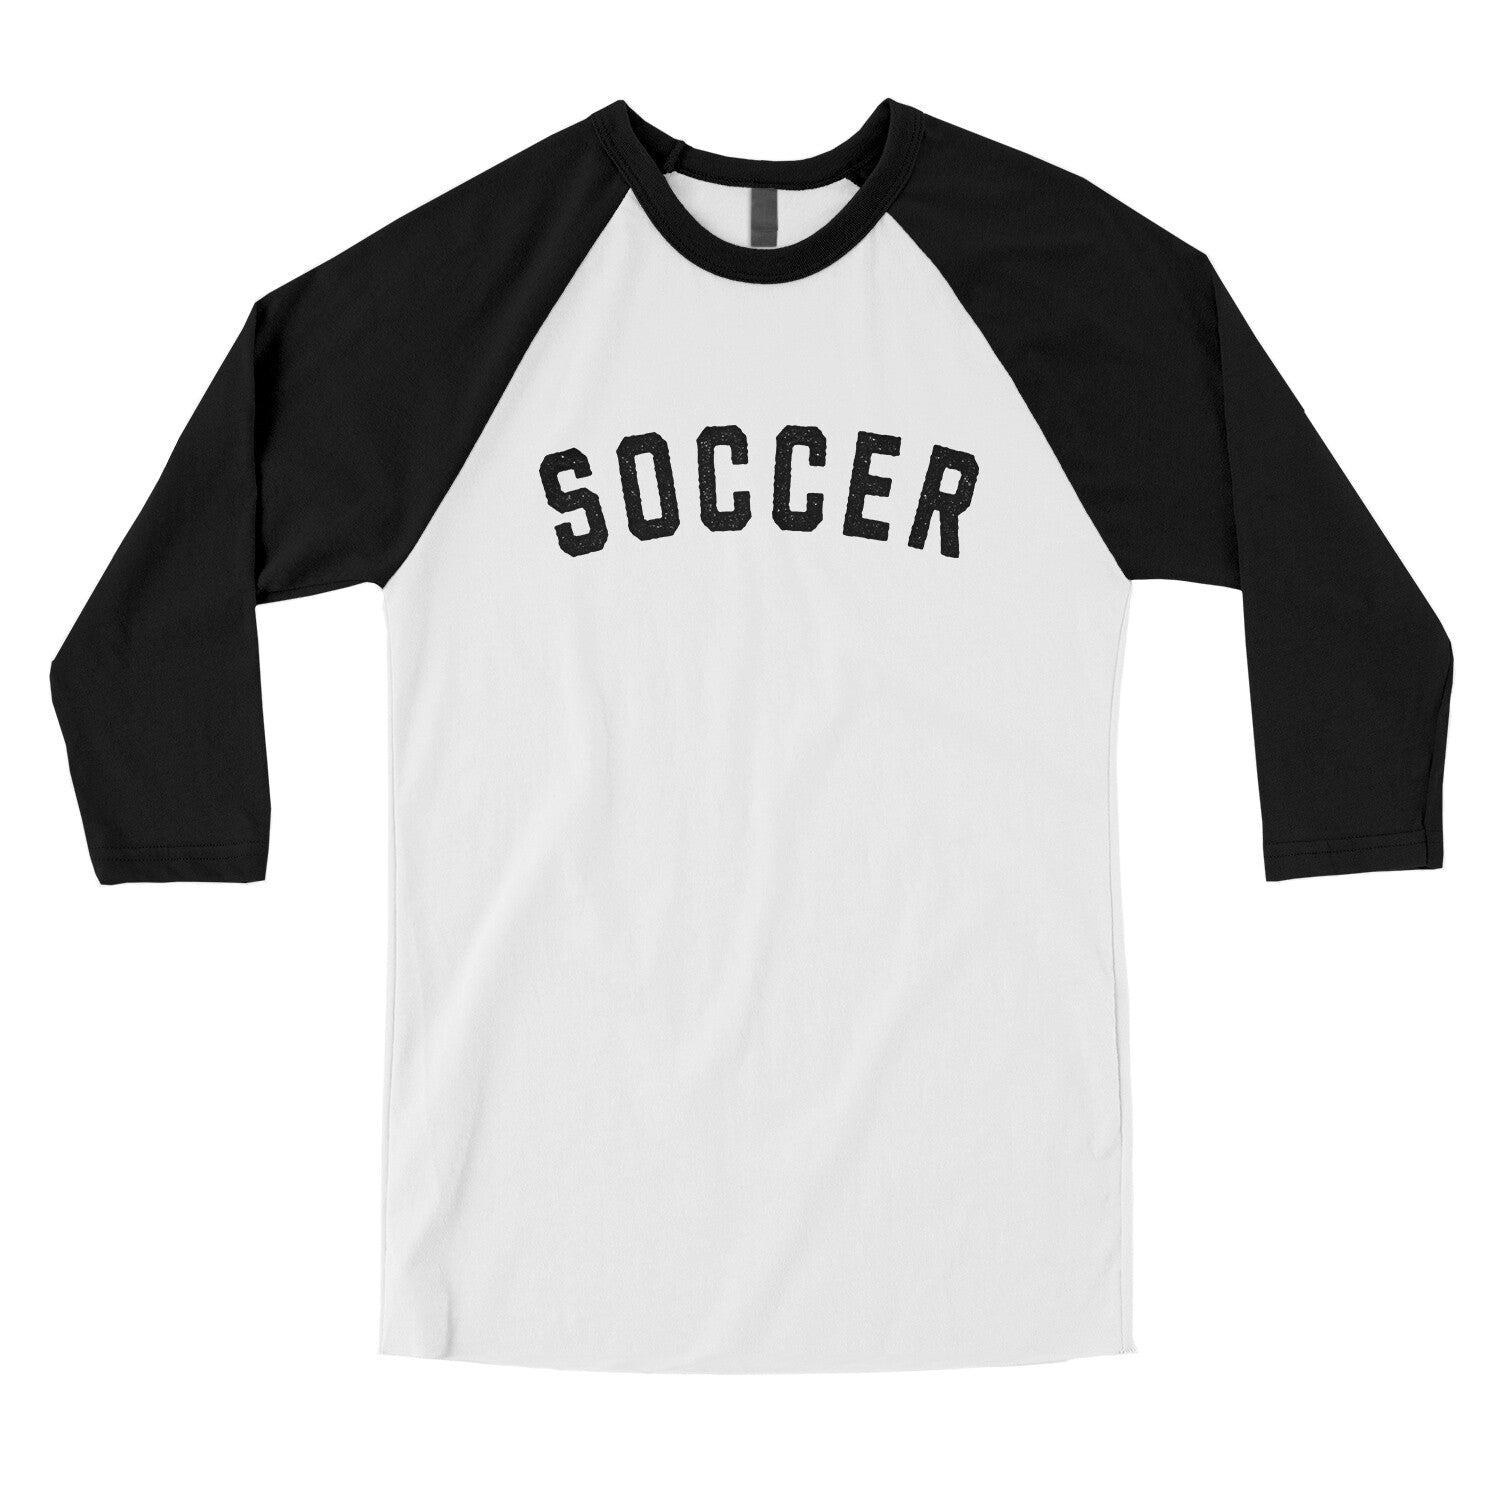 Soccer in White with Black Color